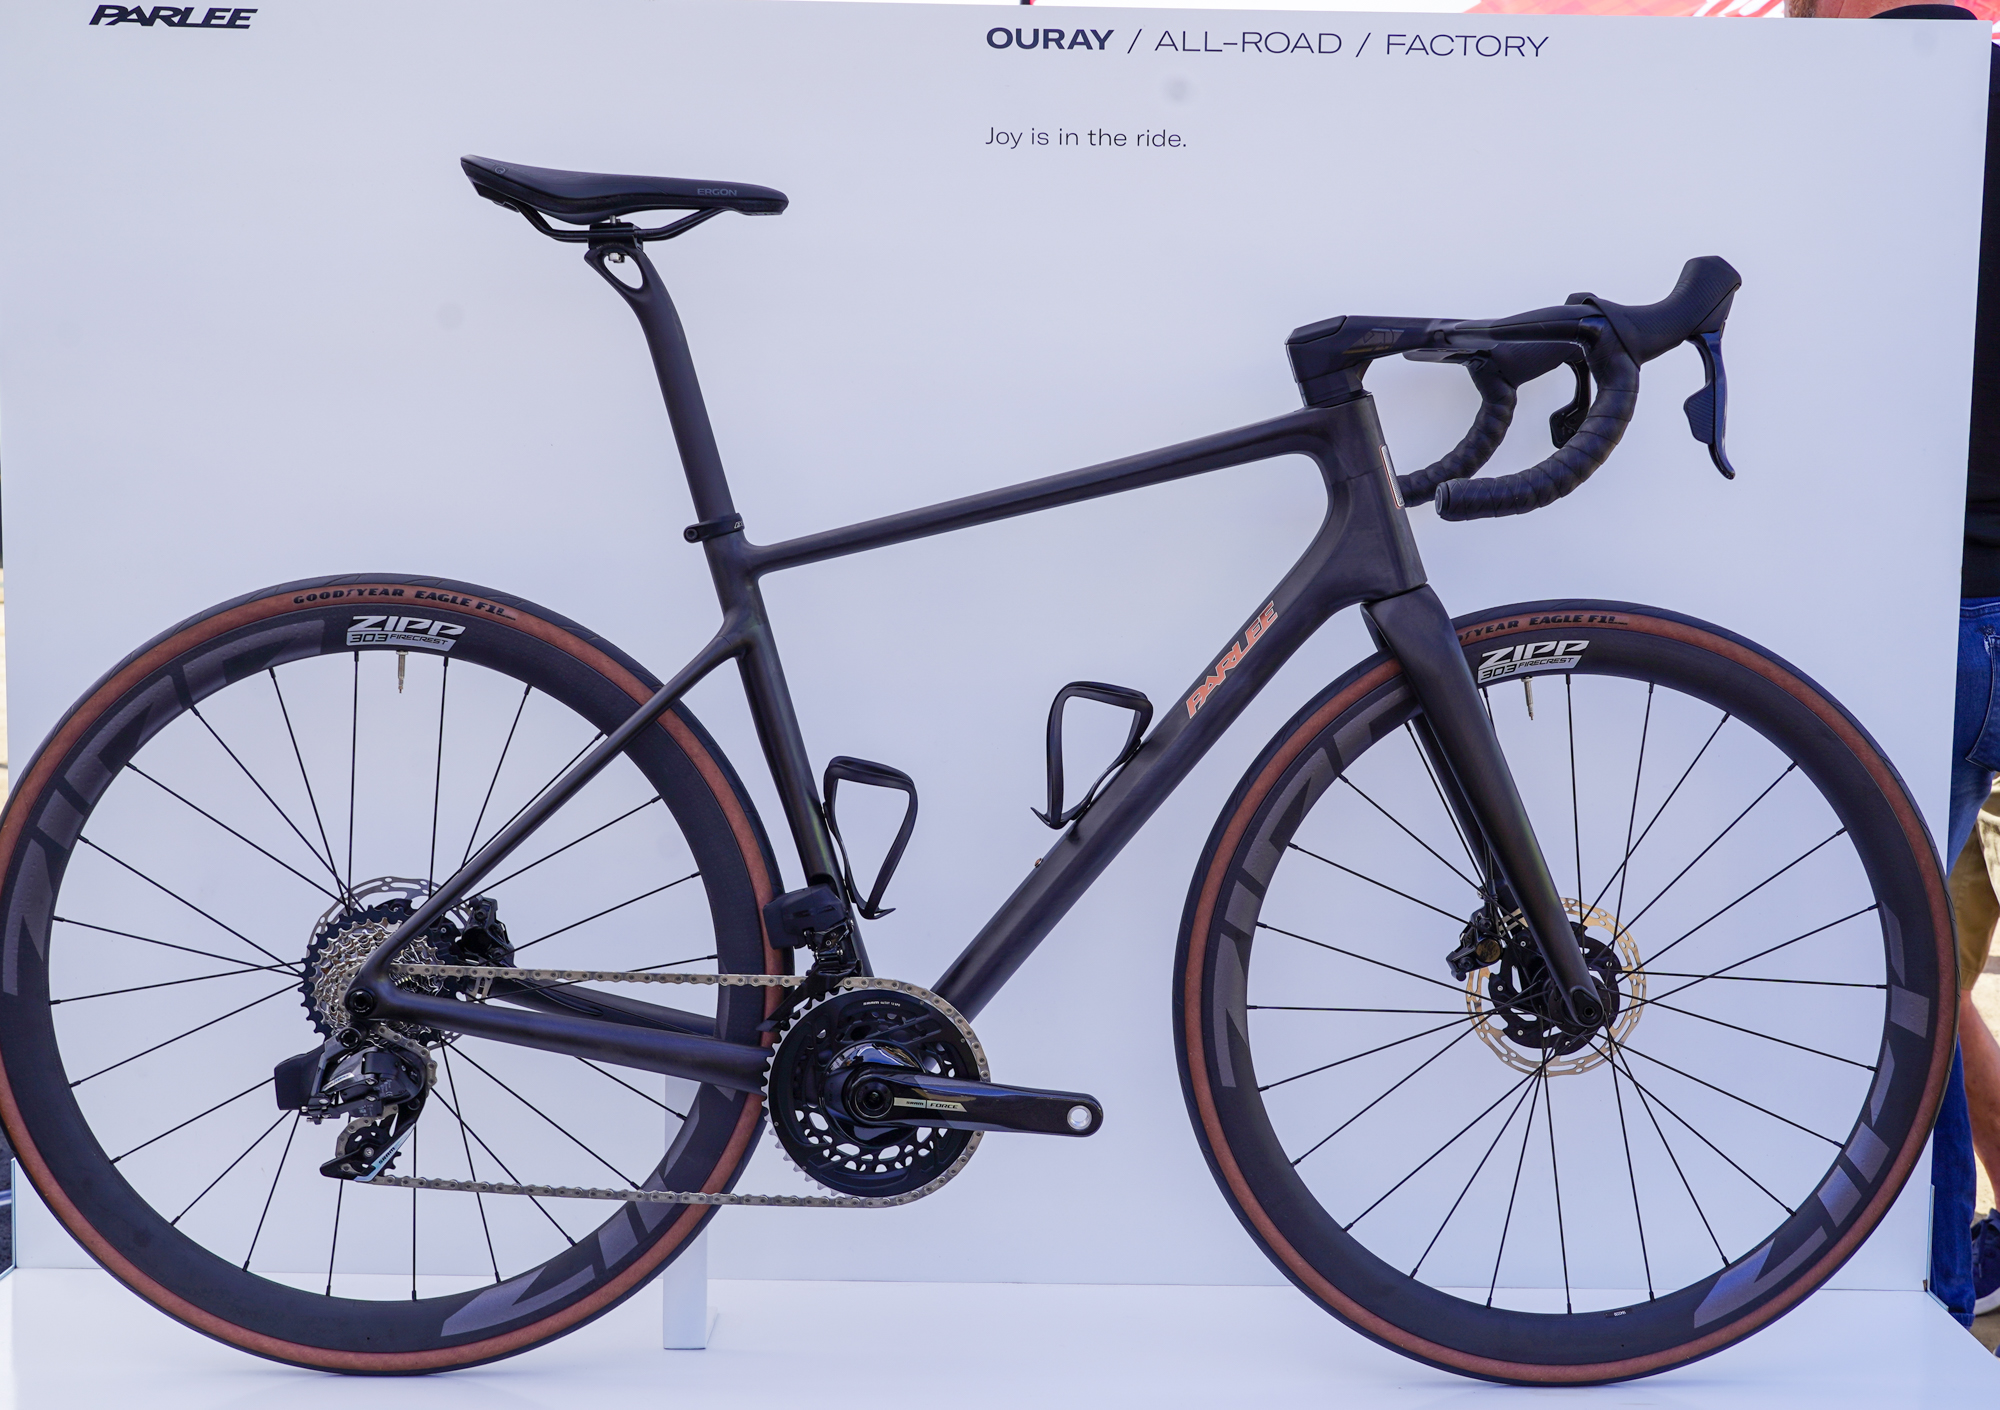 Parlee's new Ouray bike